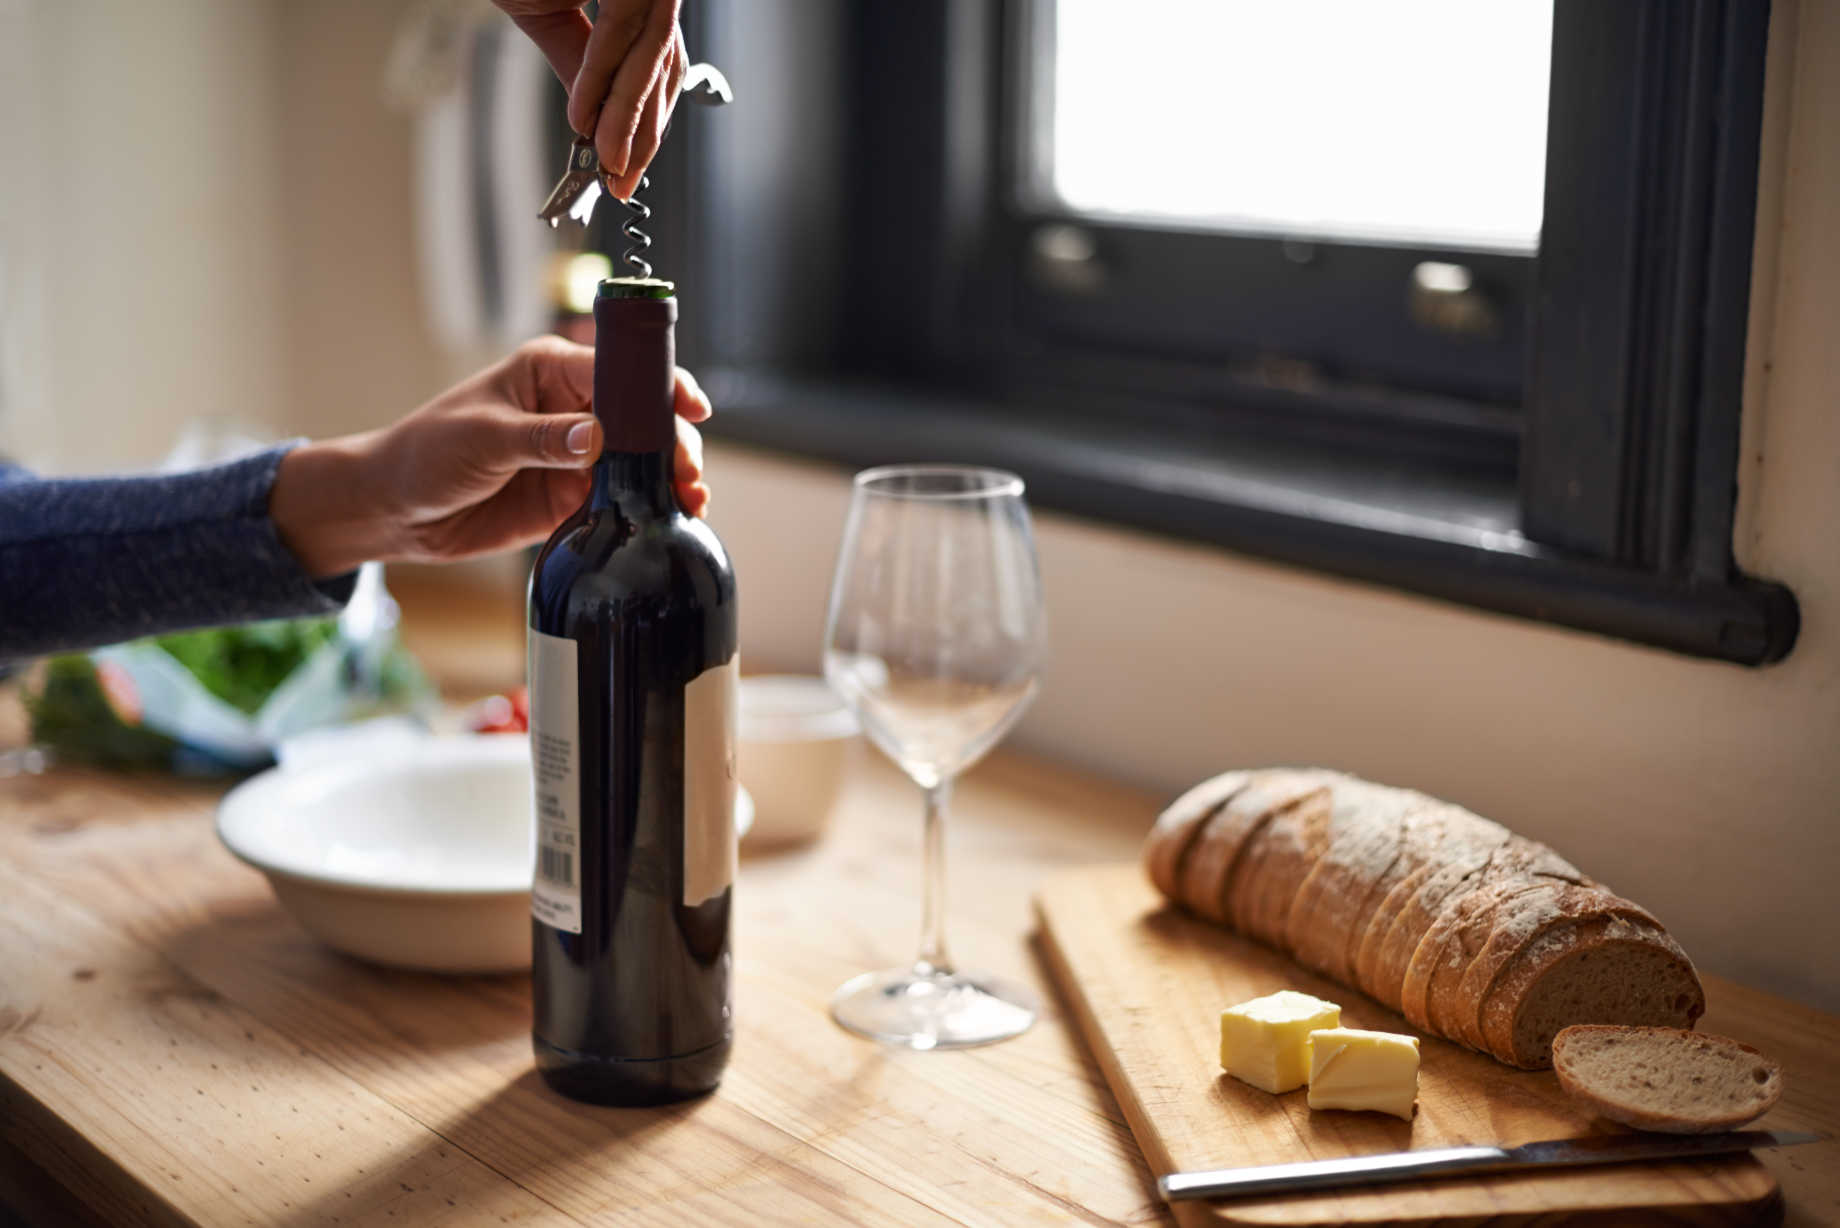 Vintage wine bottle being opened with corkscrew